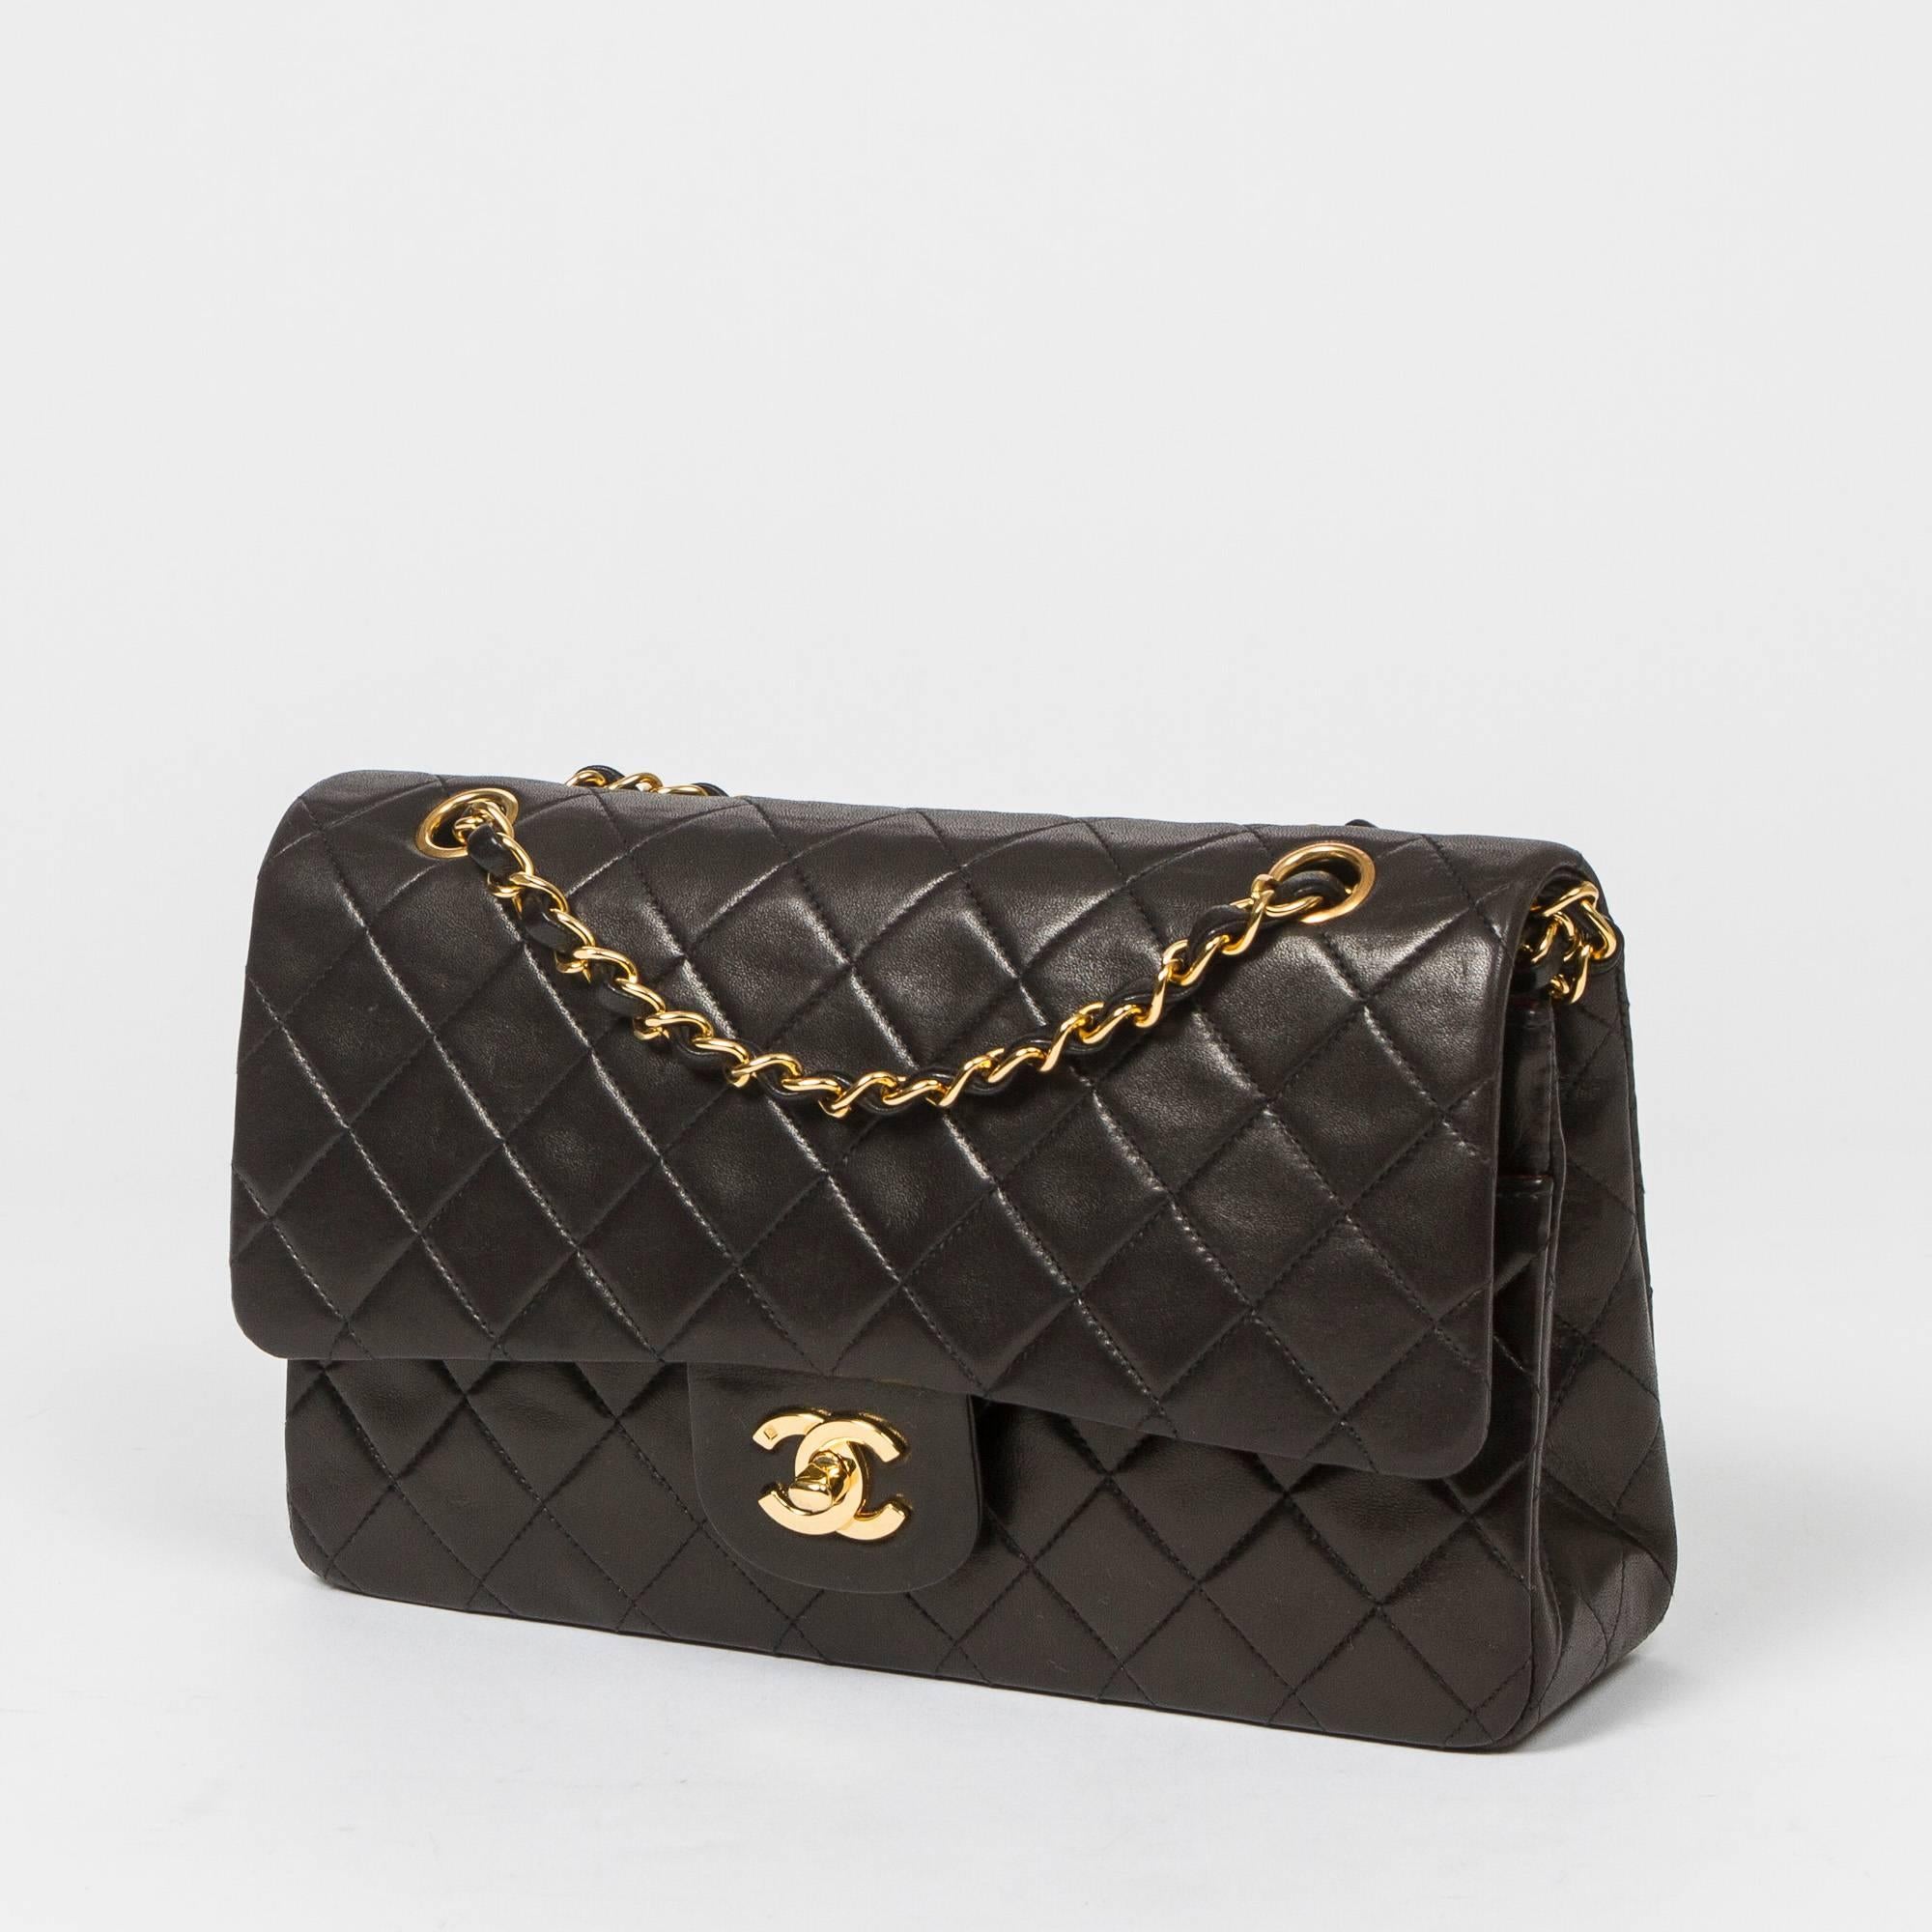 Classic Double Flap 26cm in black quilted lambskin with double chain strap interlaced with leather, gold tone CC turnlock. Back slip pocket. Burgundy leather lined interior with 3 compartments. Gold tone 